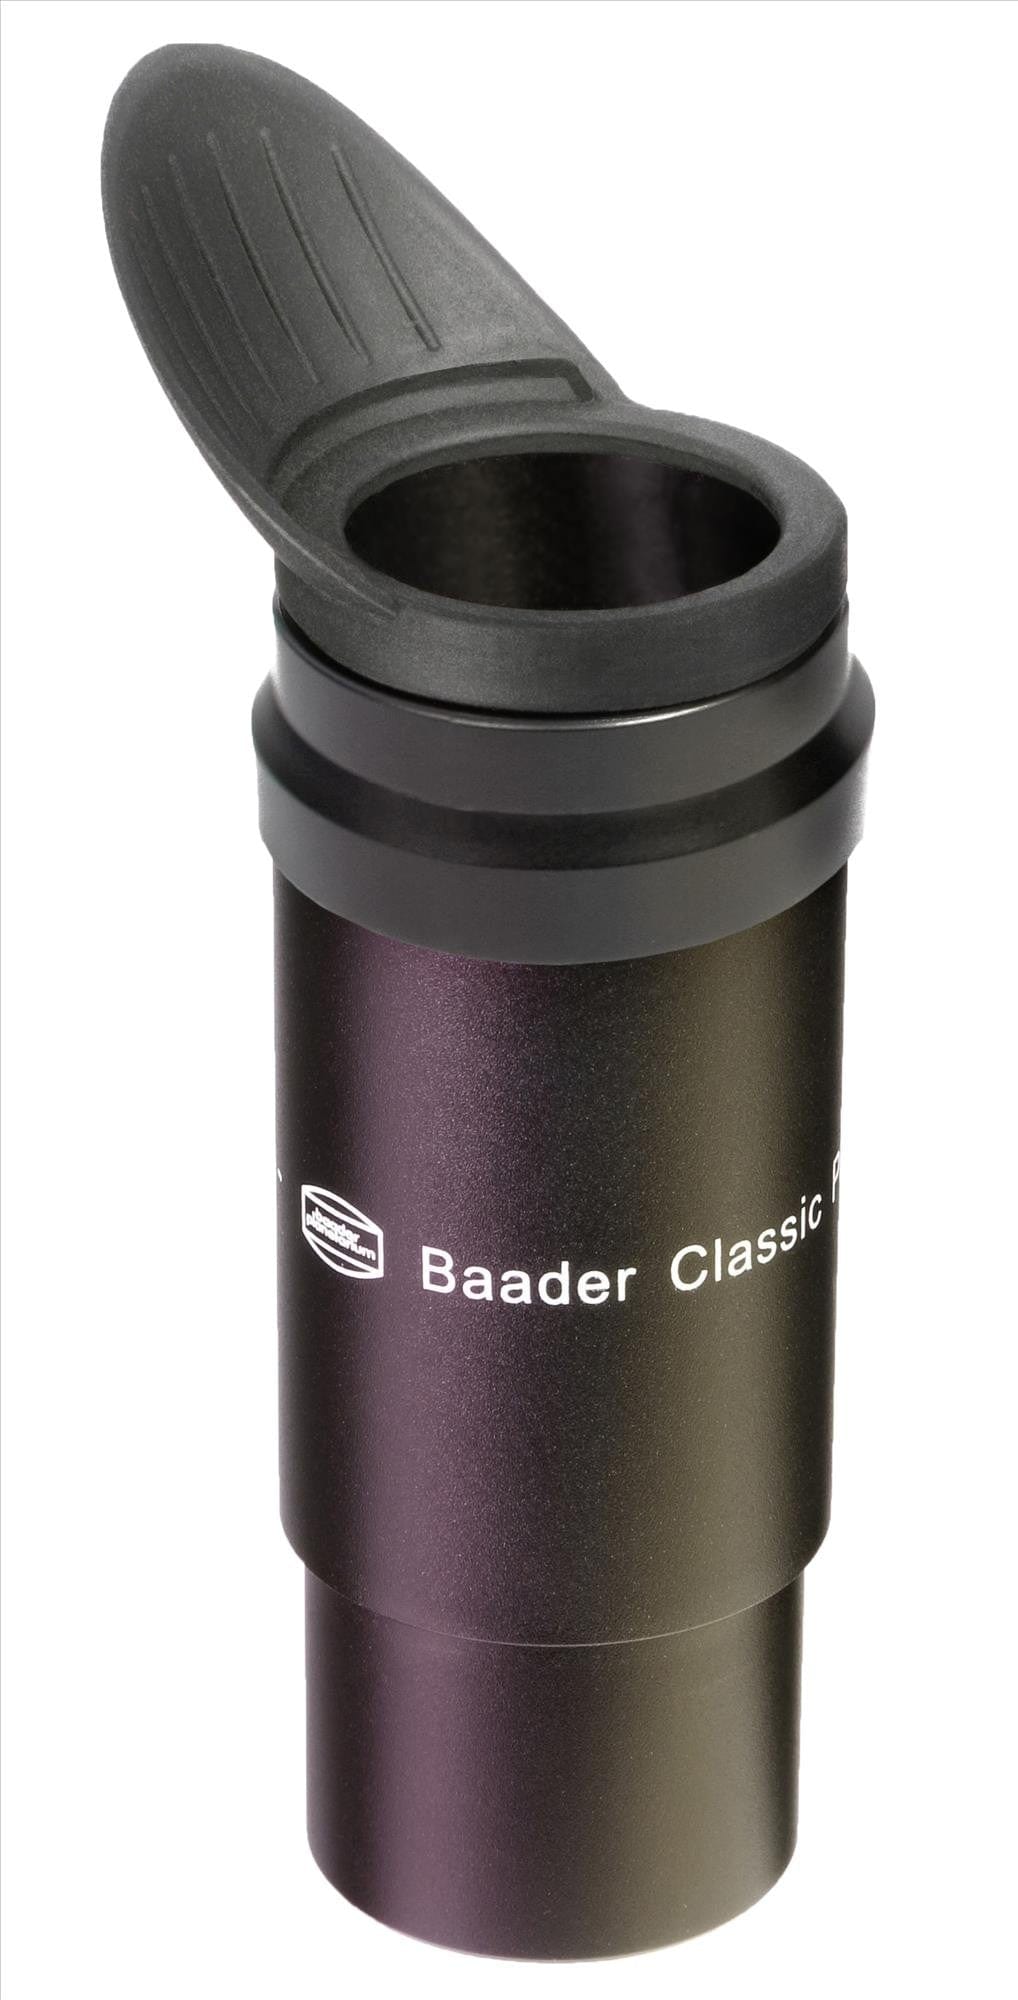 Baader Planetarium Accessory Baader Classic Plössl 32mm 1¼" Eyepiece (HT-MC) - With Aux Spacer Tube and Winged Rubber Eyecup - 2954132